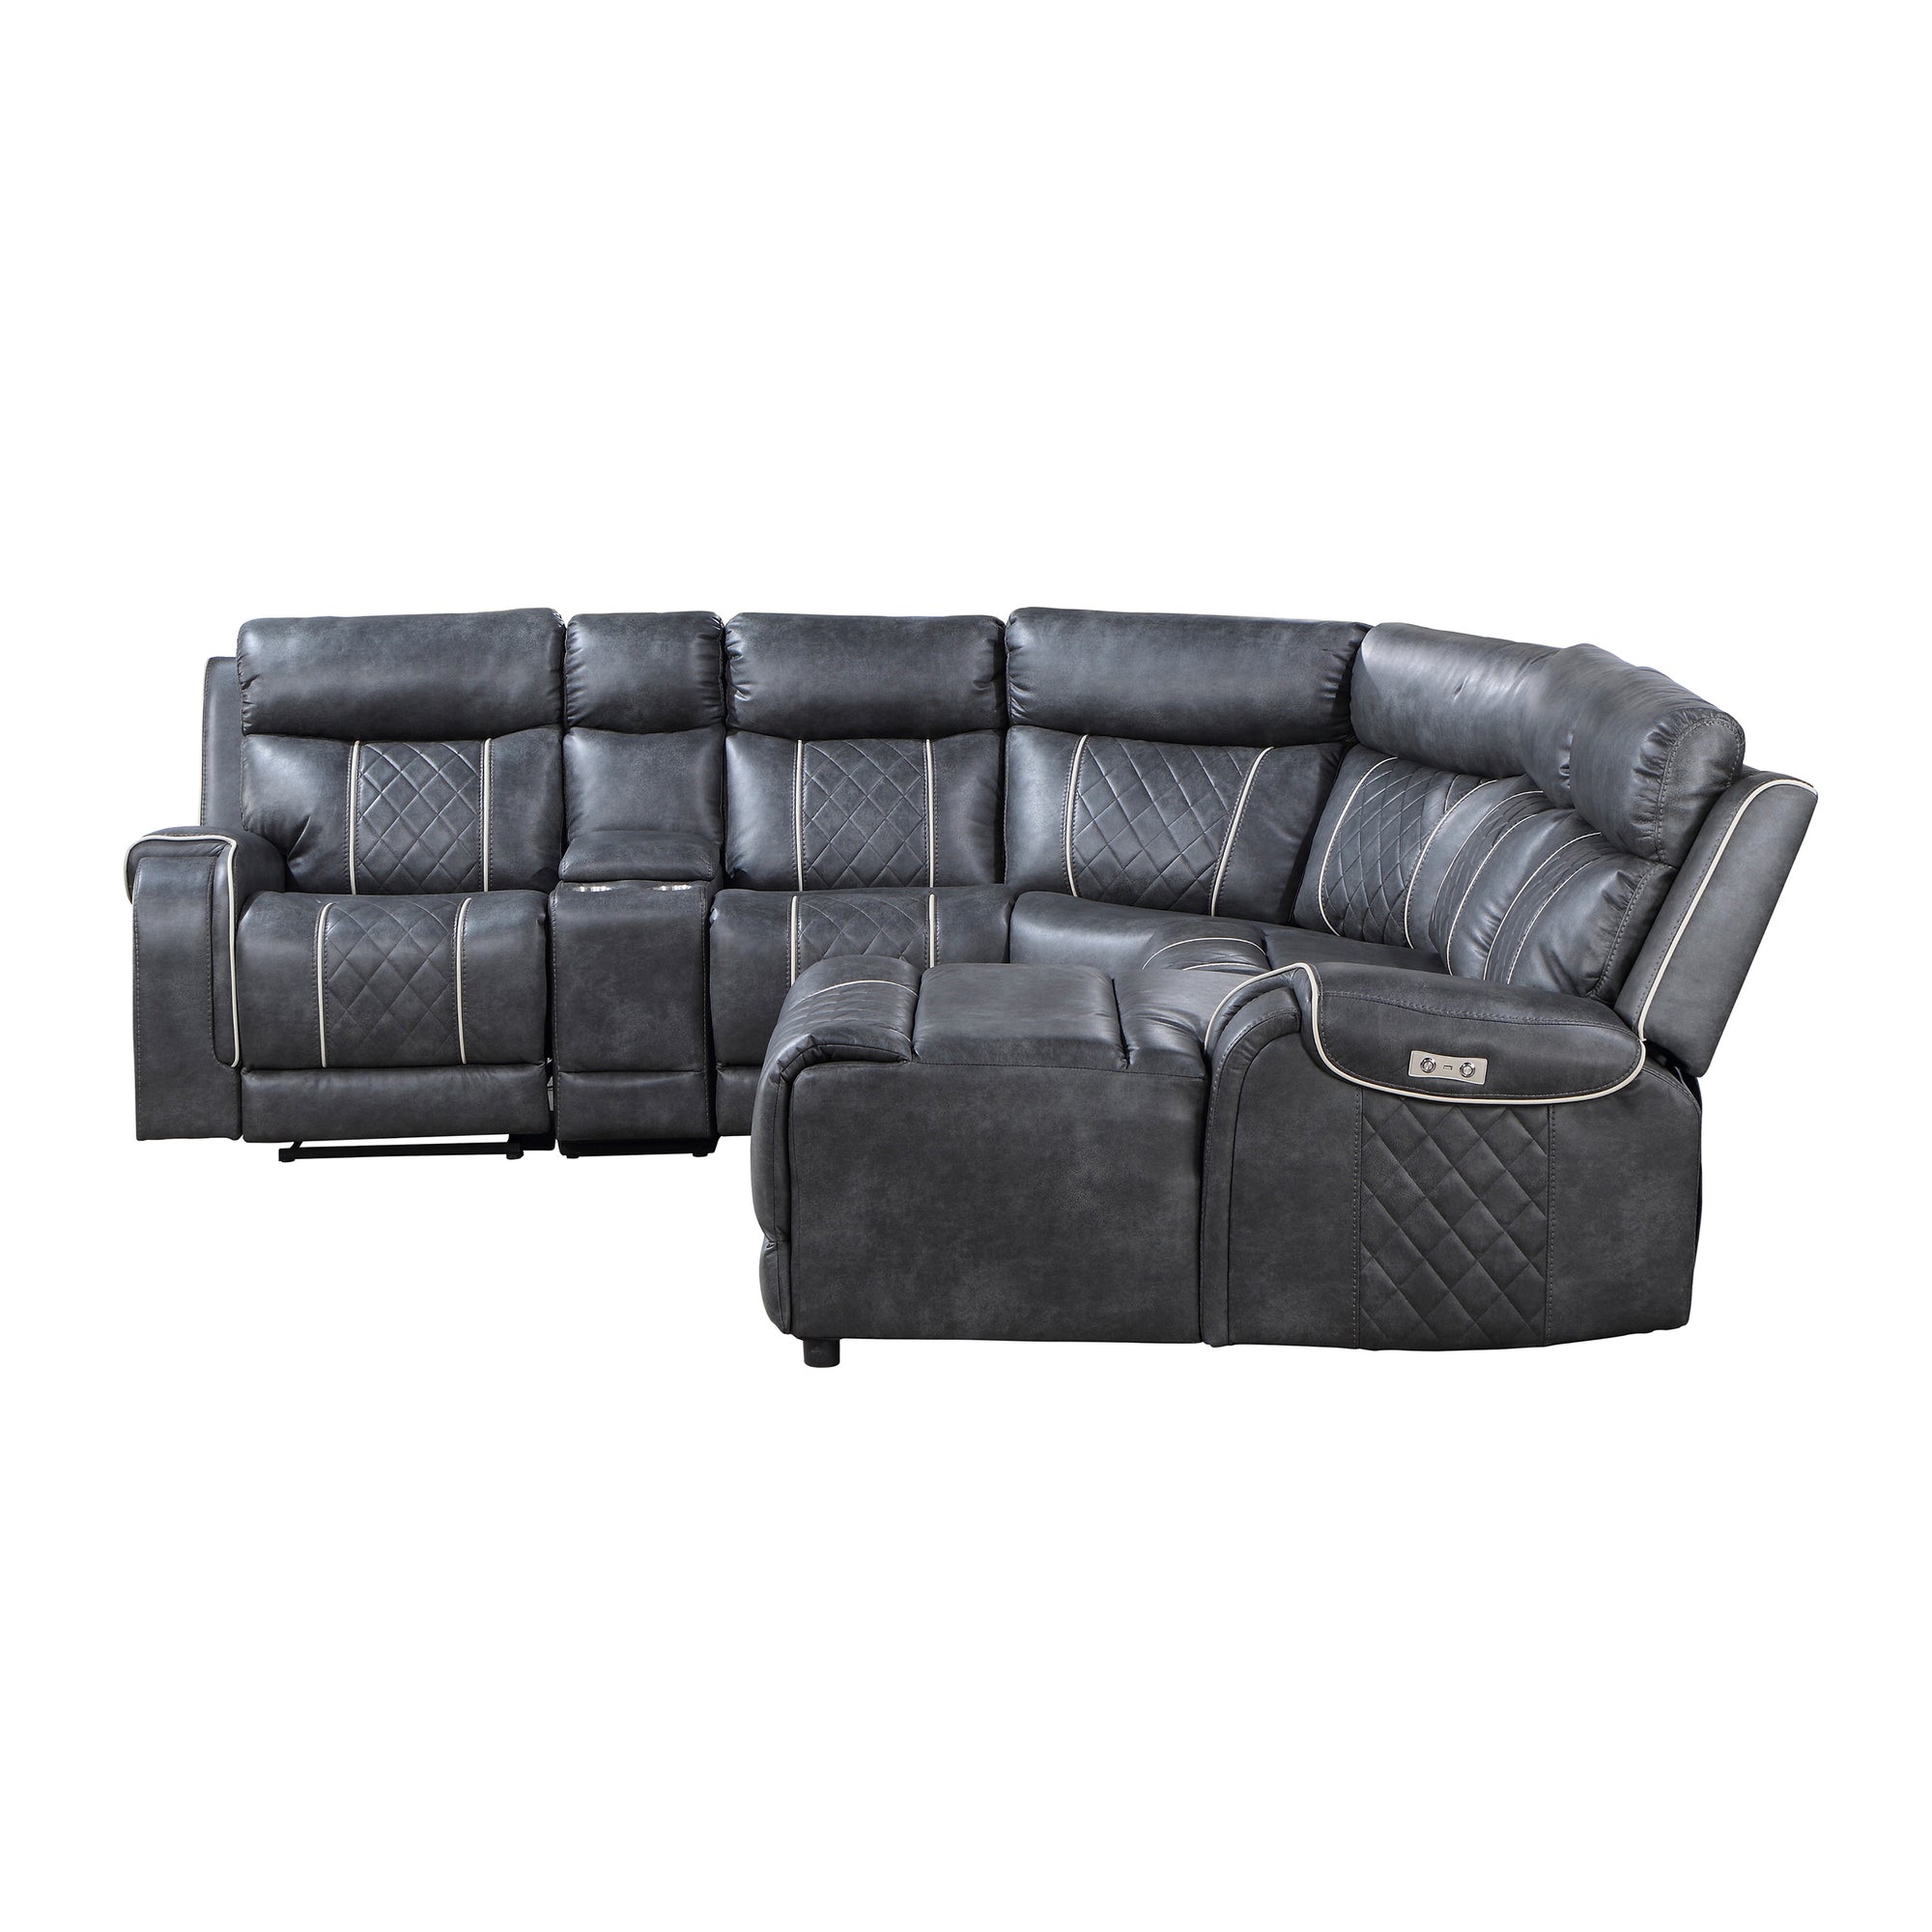 Percival Faux Leather Power Modular Reclining Sectional Sofa with Right Chaise